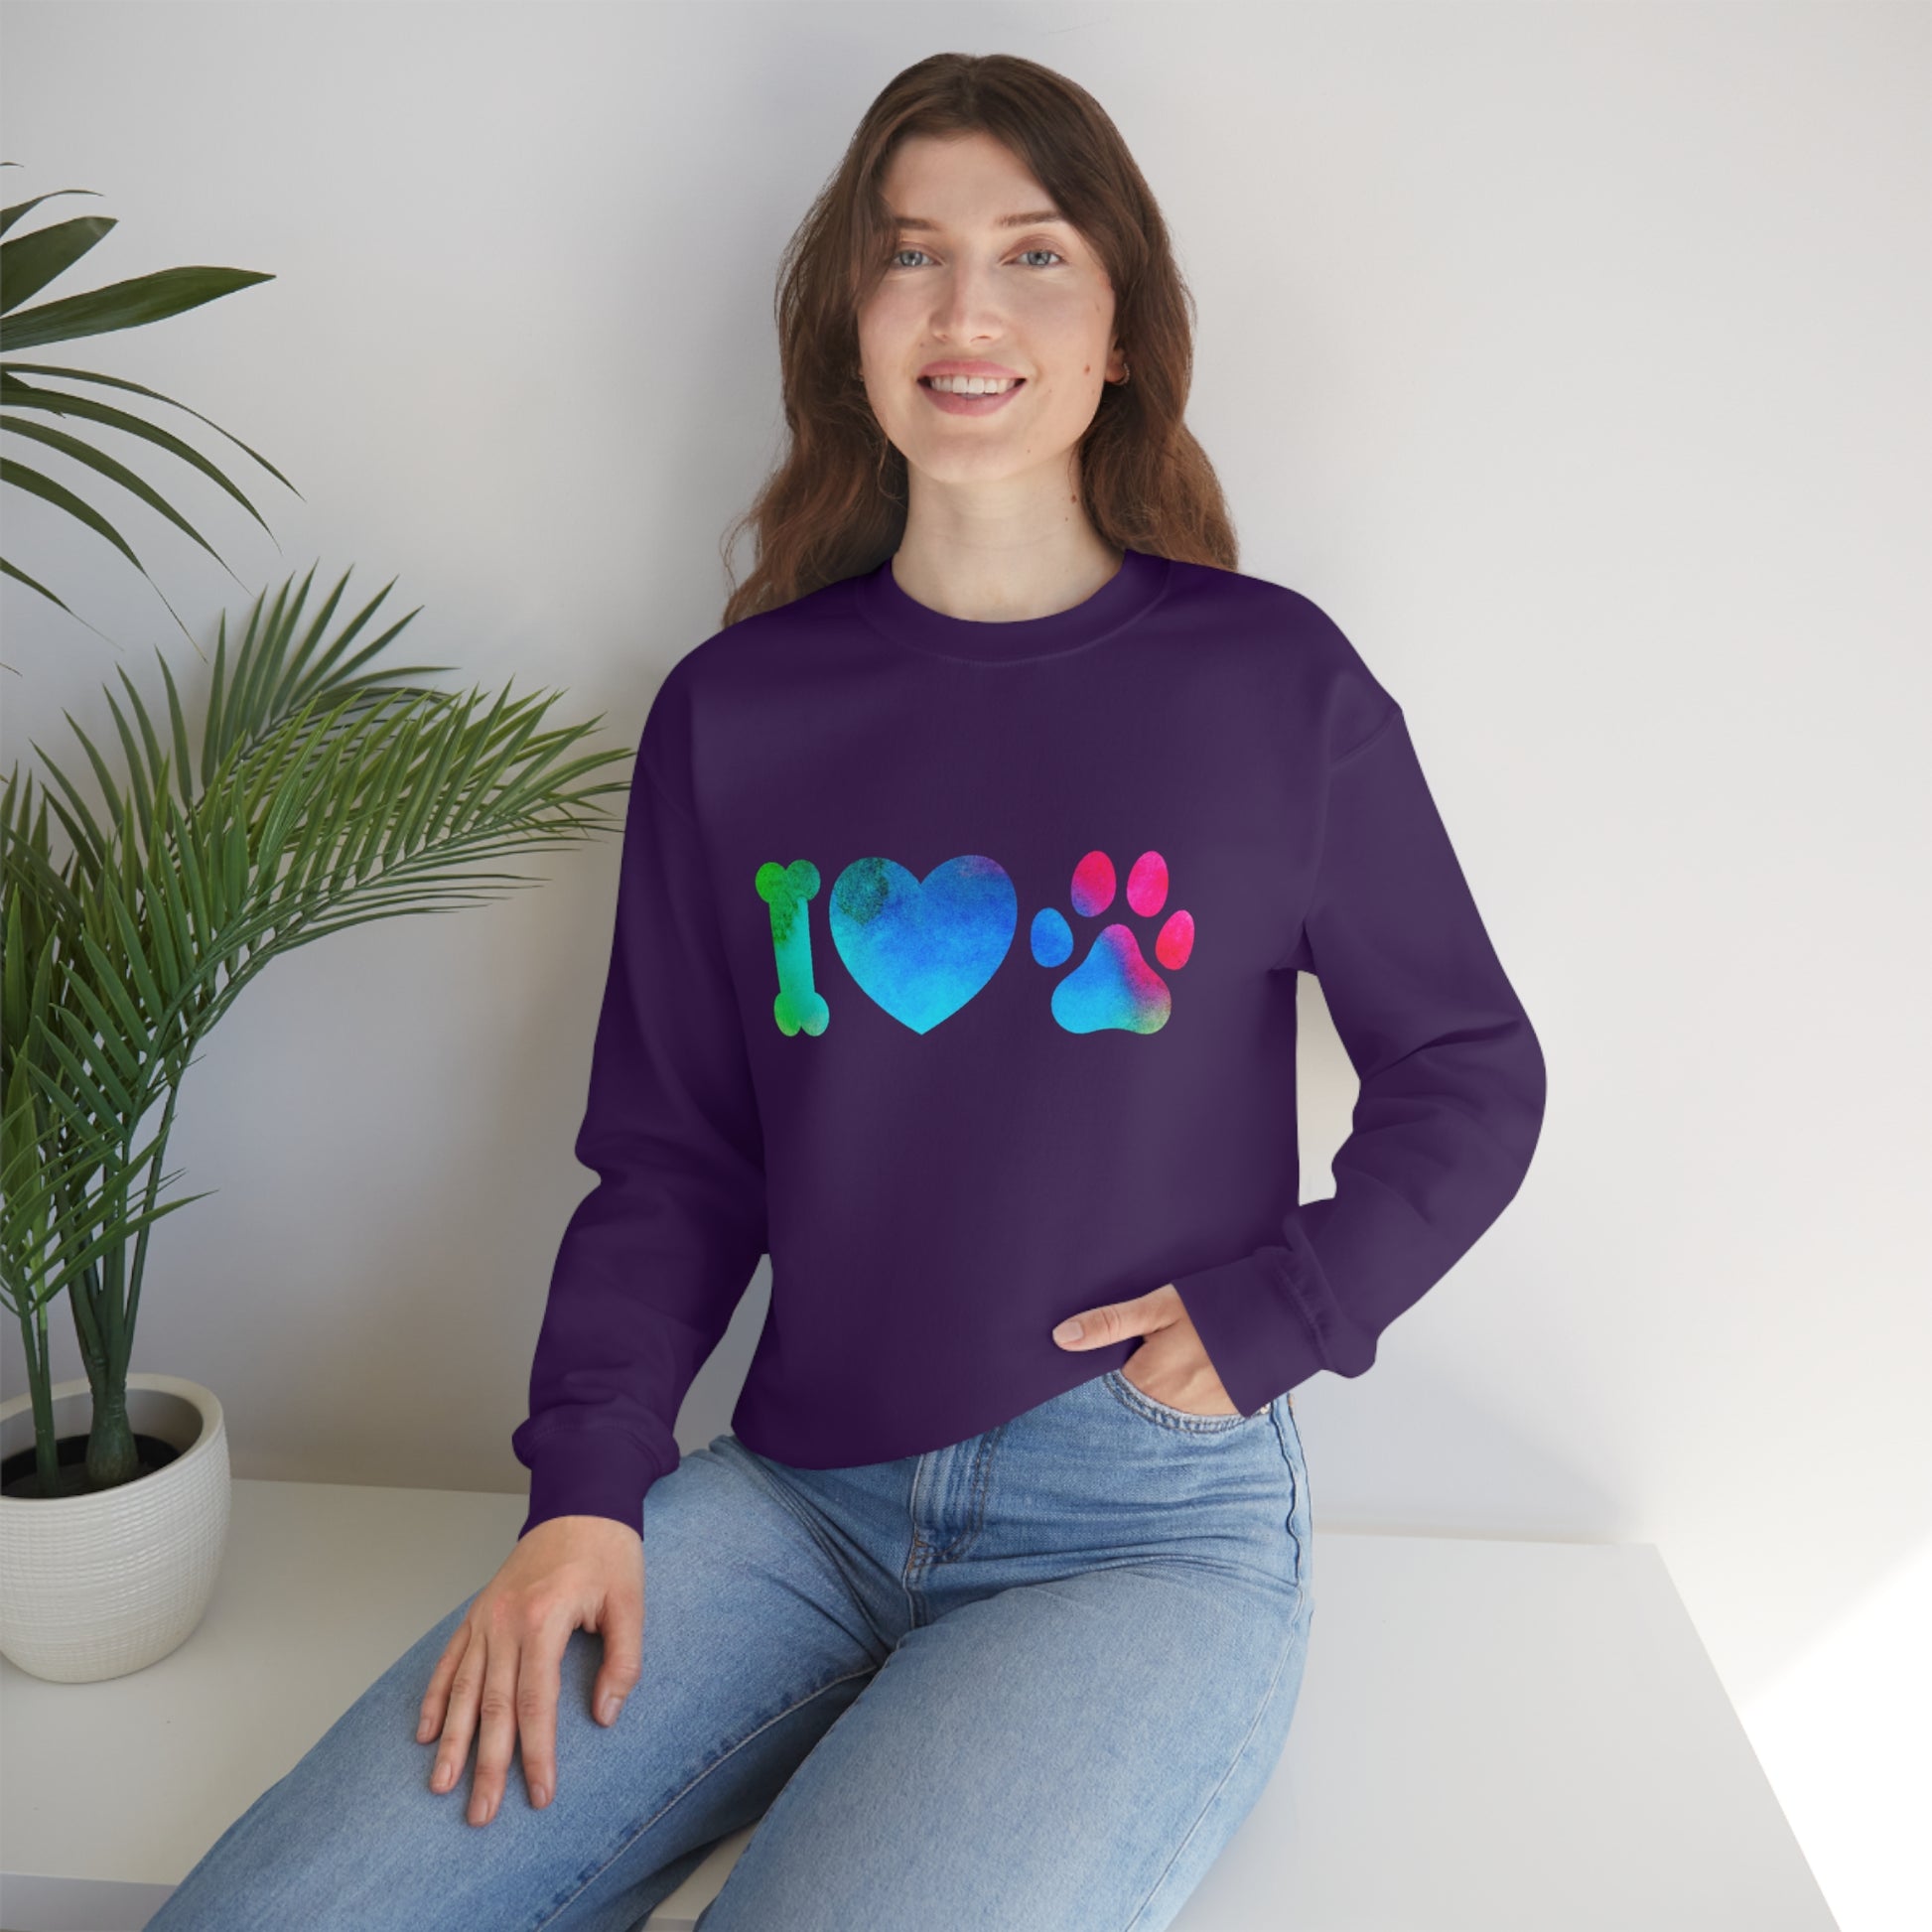 Mock up of a woman sitting on a surface while wearing the Purple sweatshirt